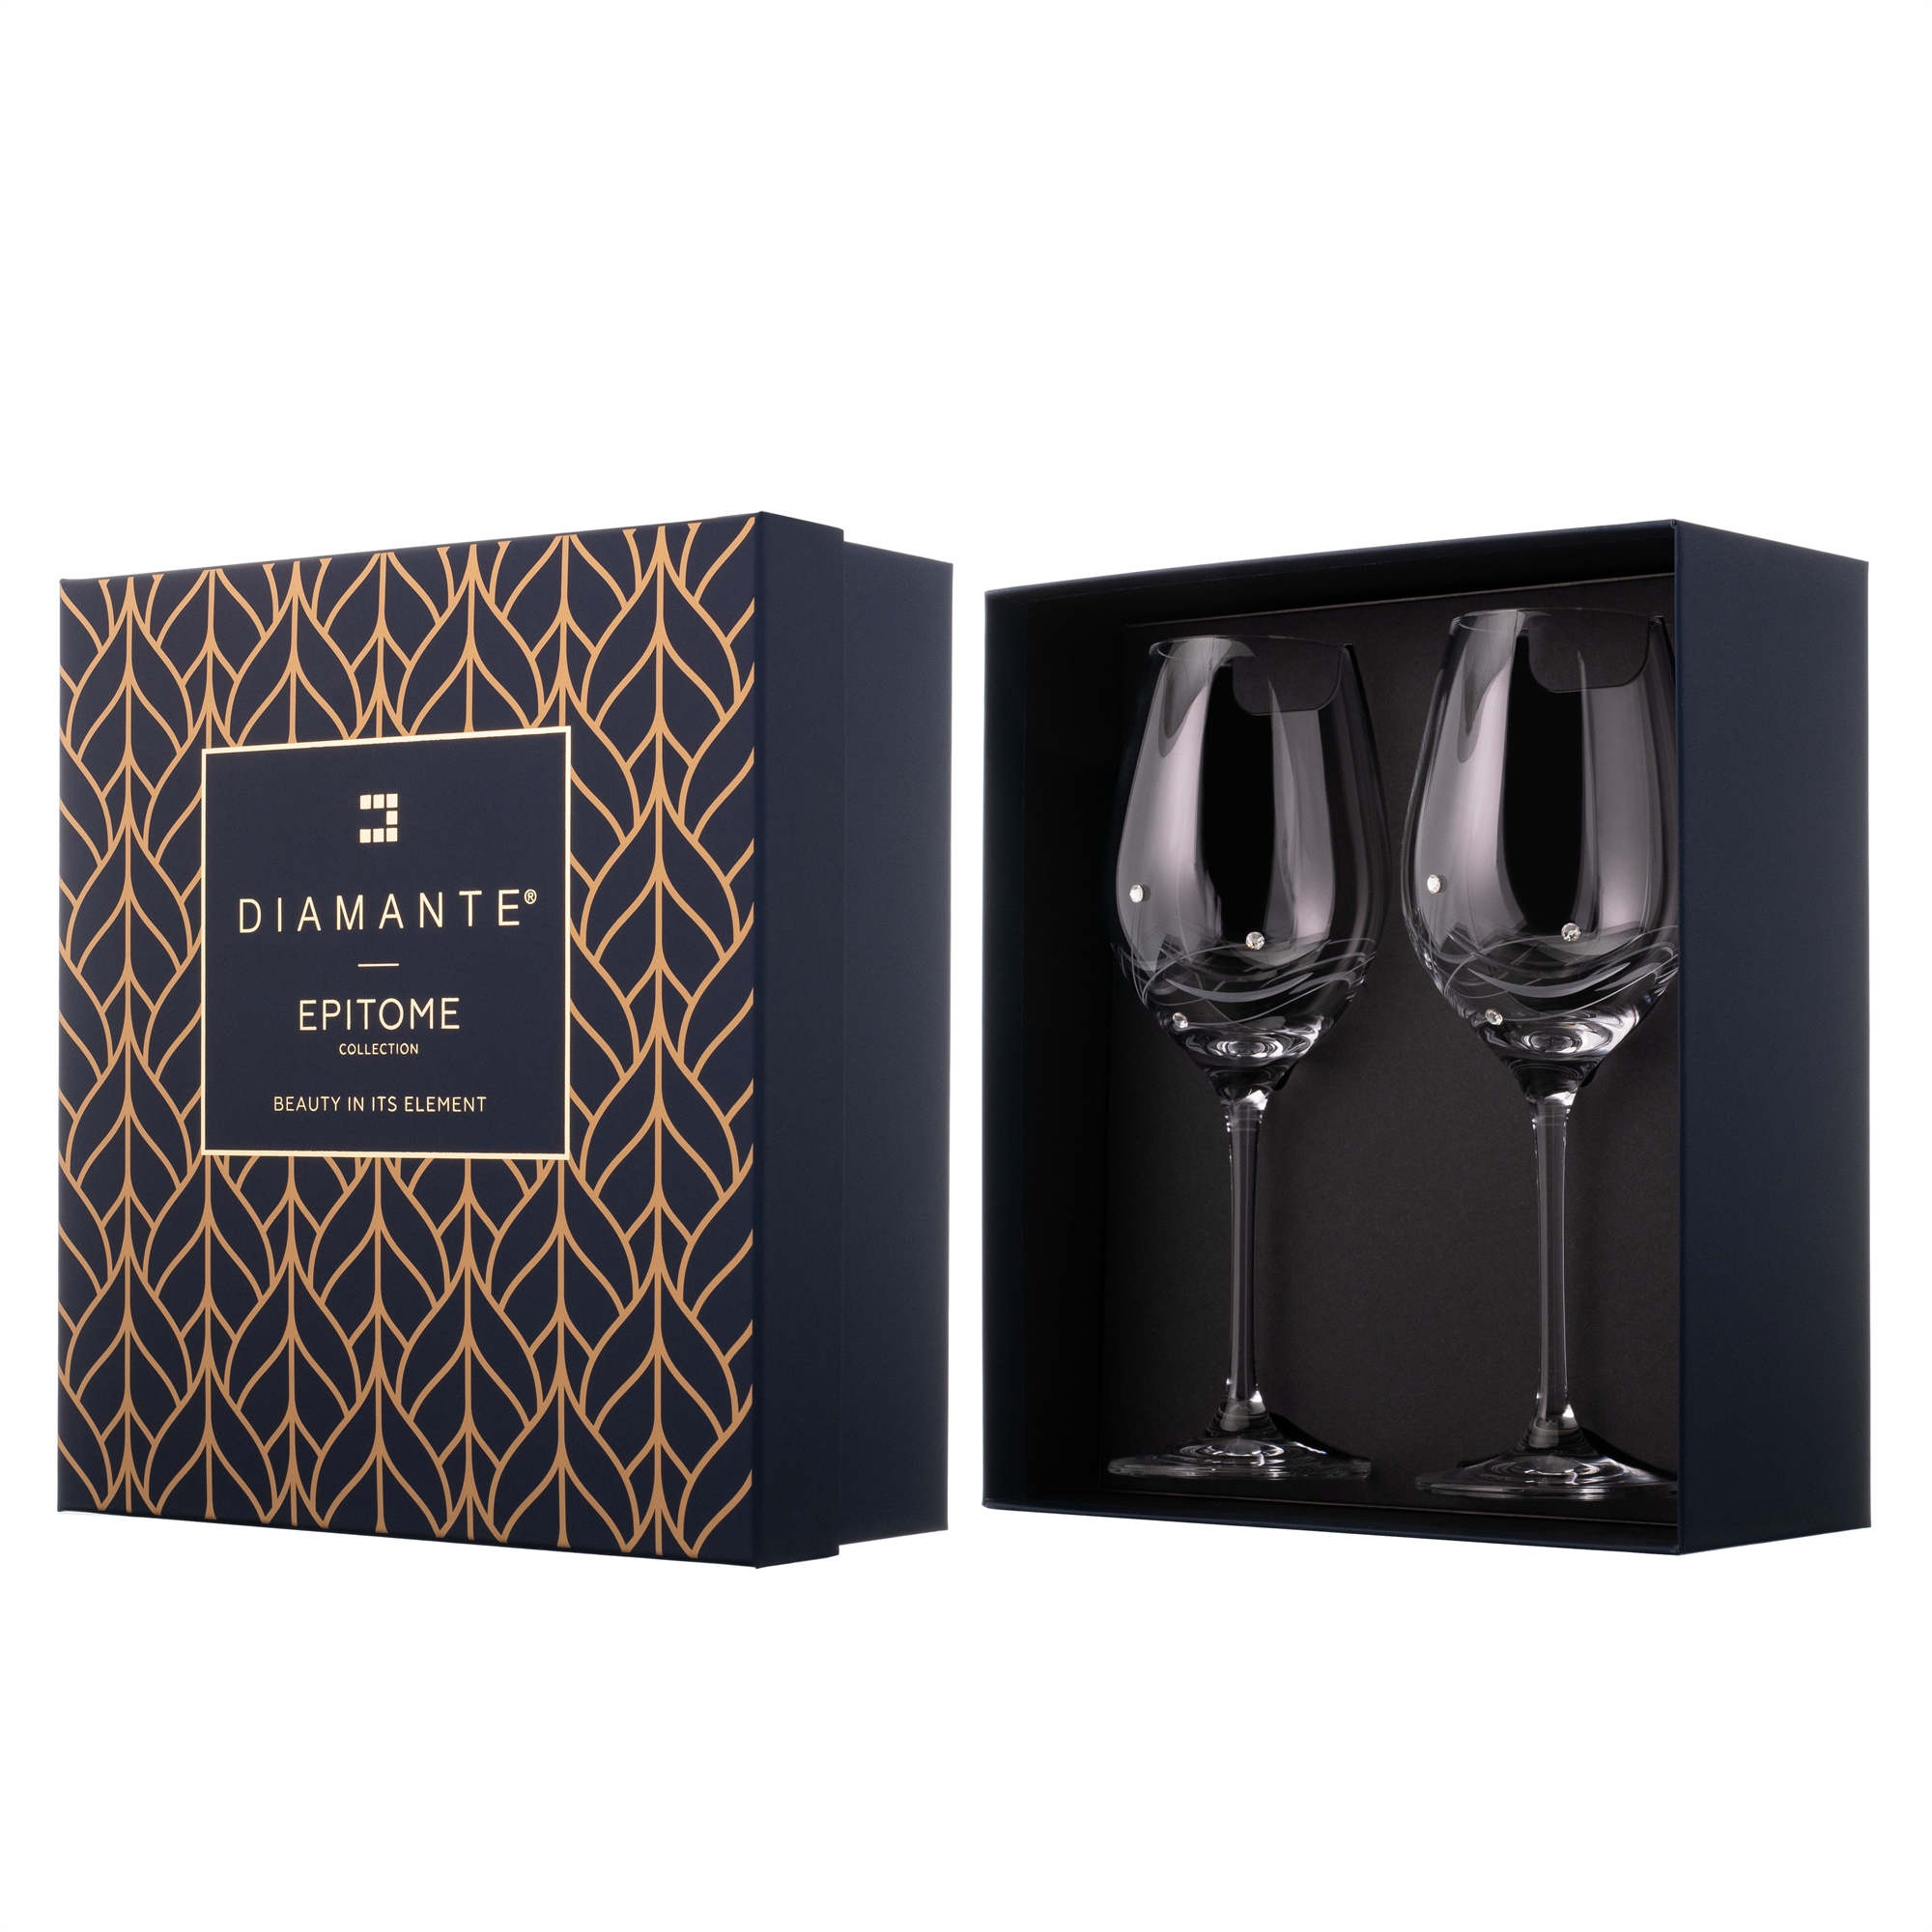 2 Diamante Wine Glasses with Elegance Spiral Cutting in a Gift Box - SL139